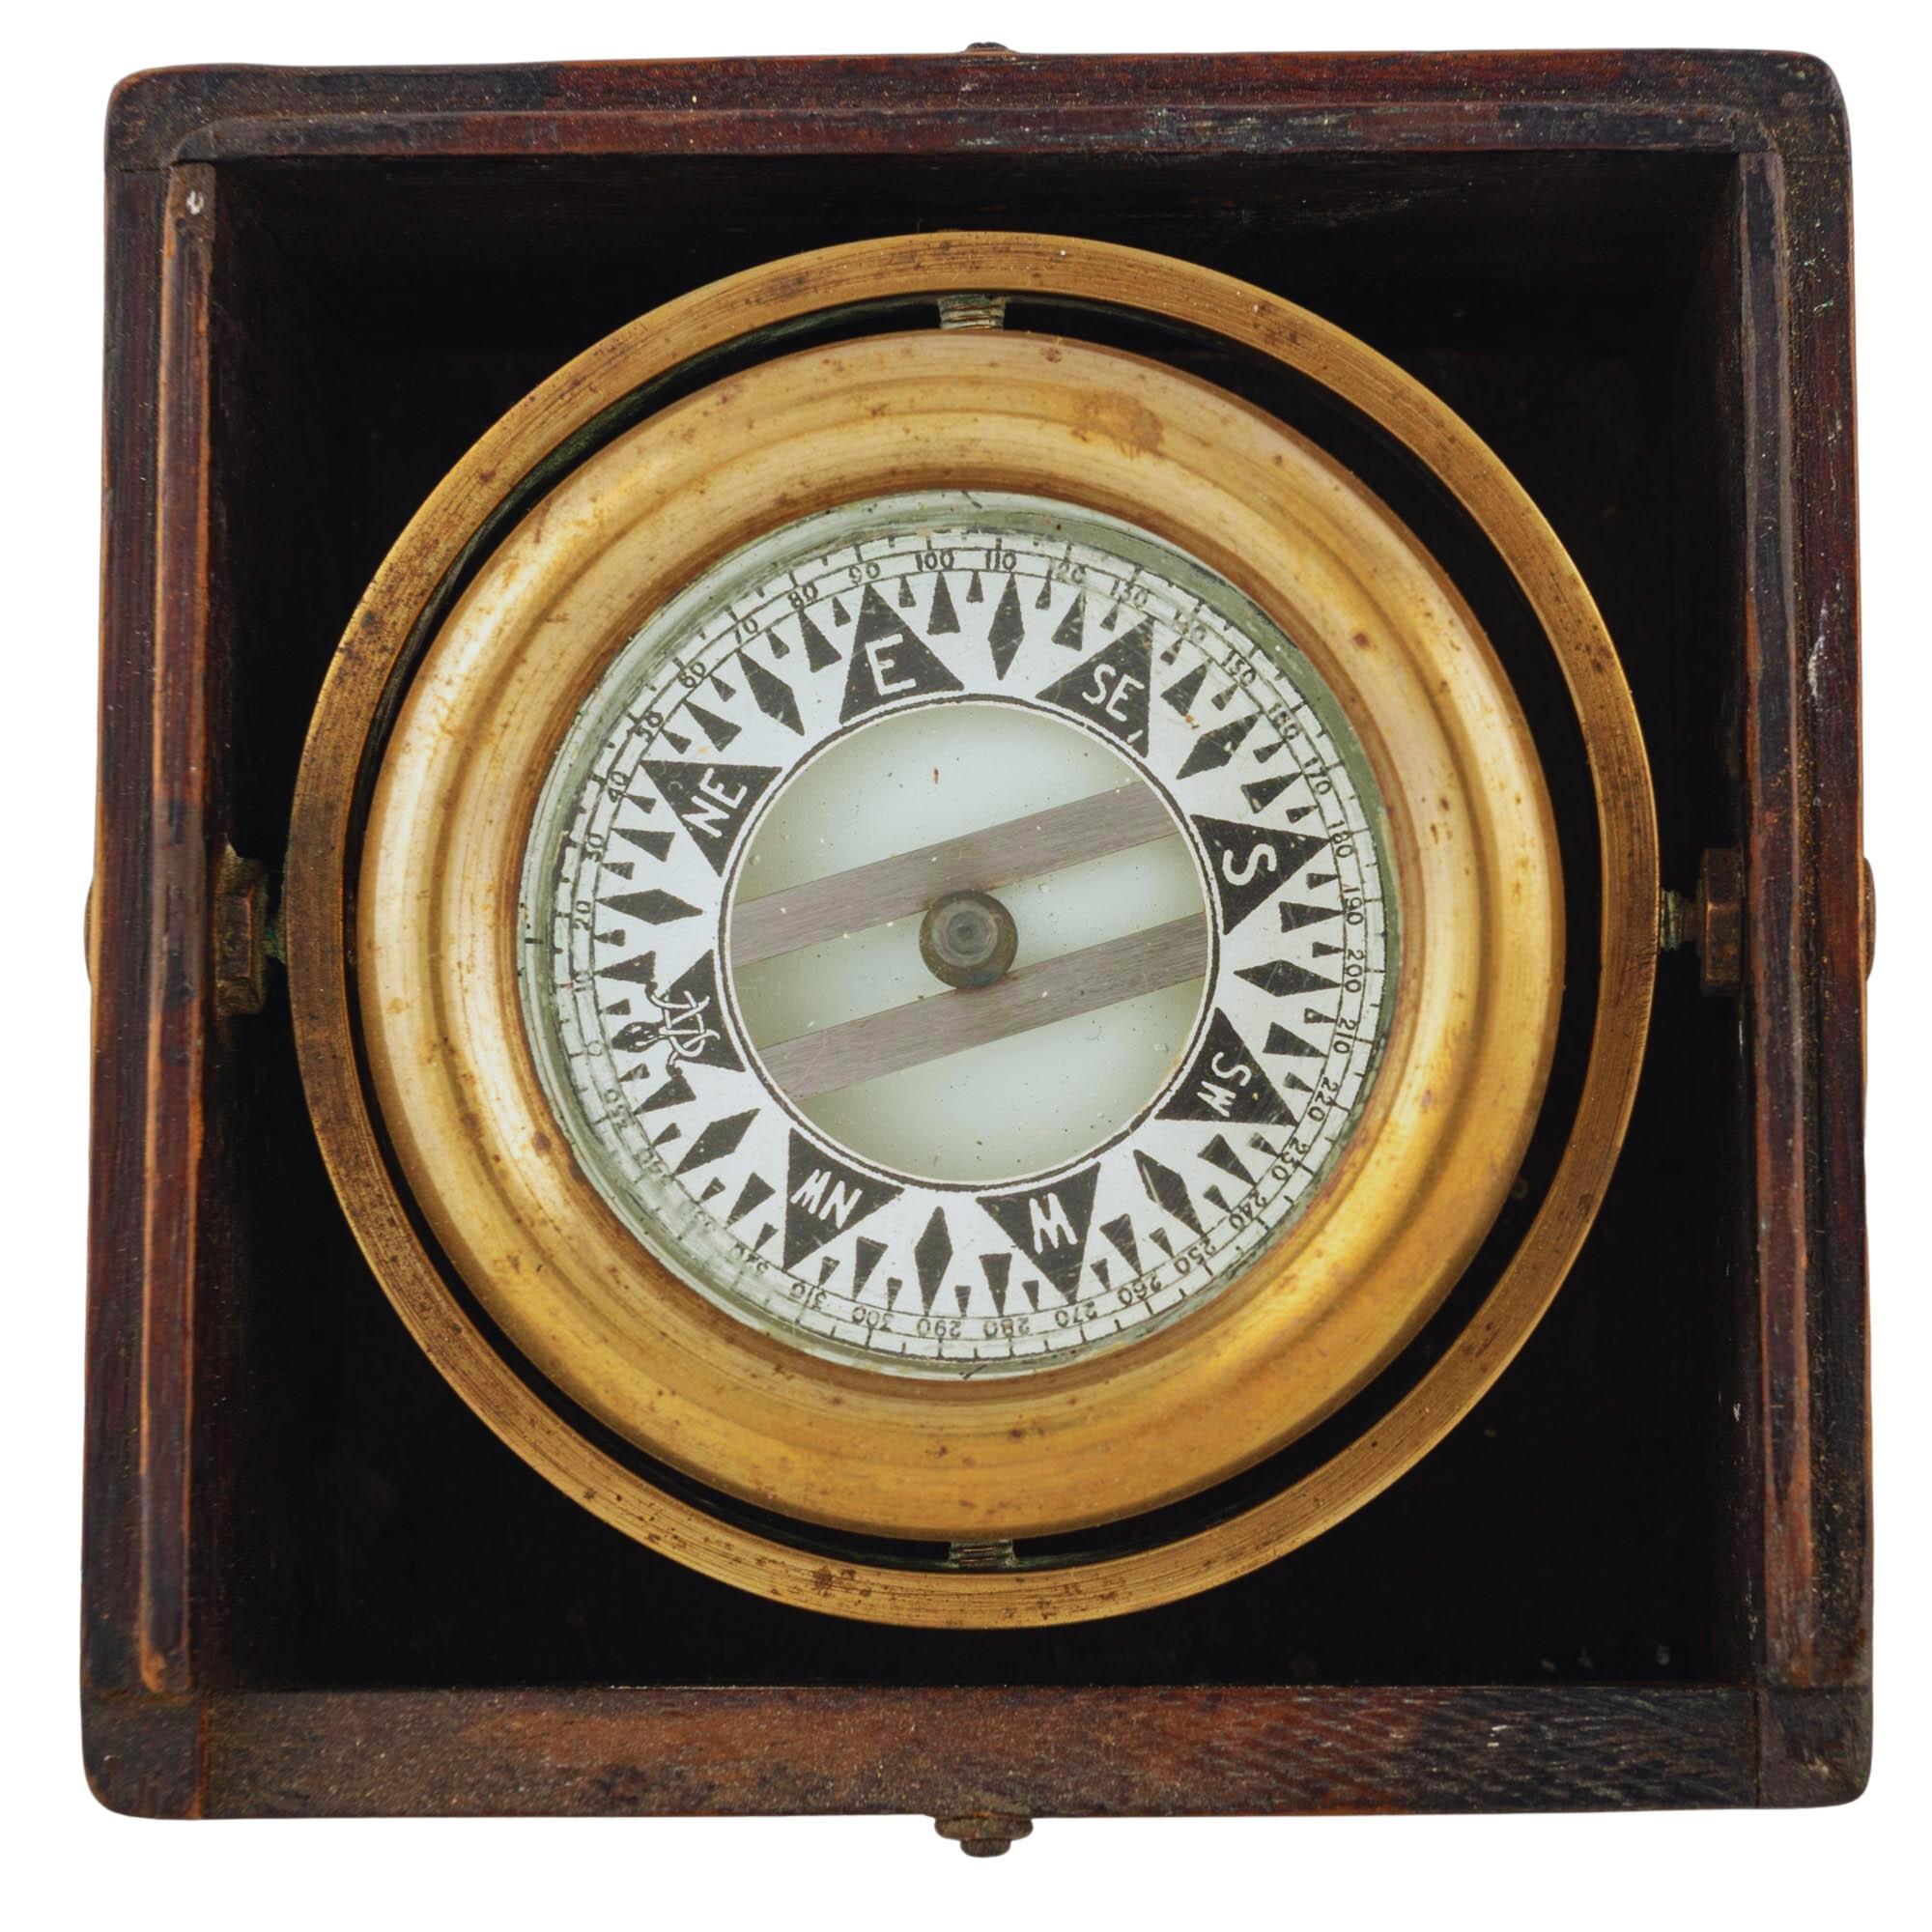 American Vintage Gimbal-Mounted Compass by Wilcox, Crittenden & Co.